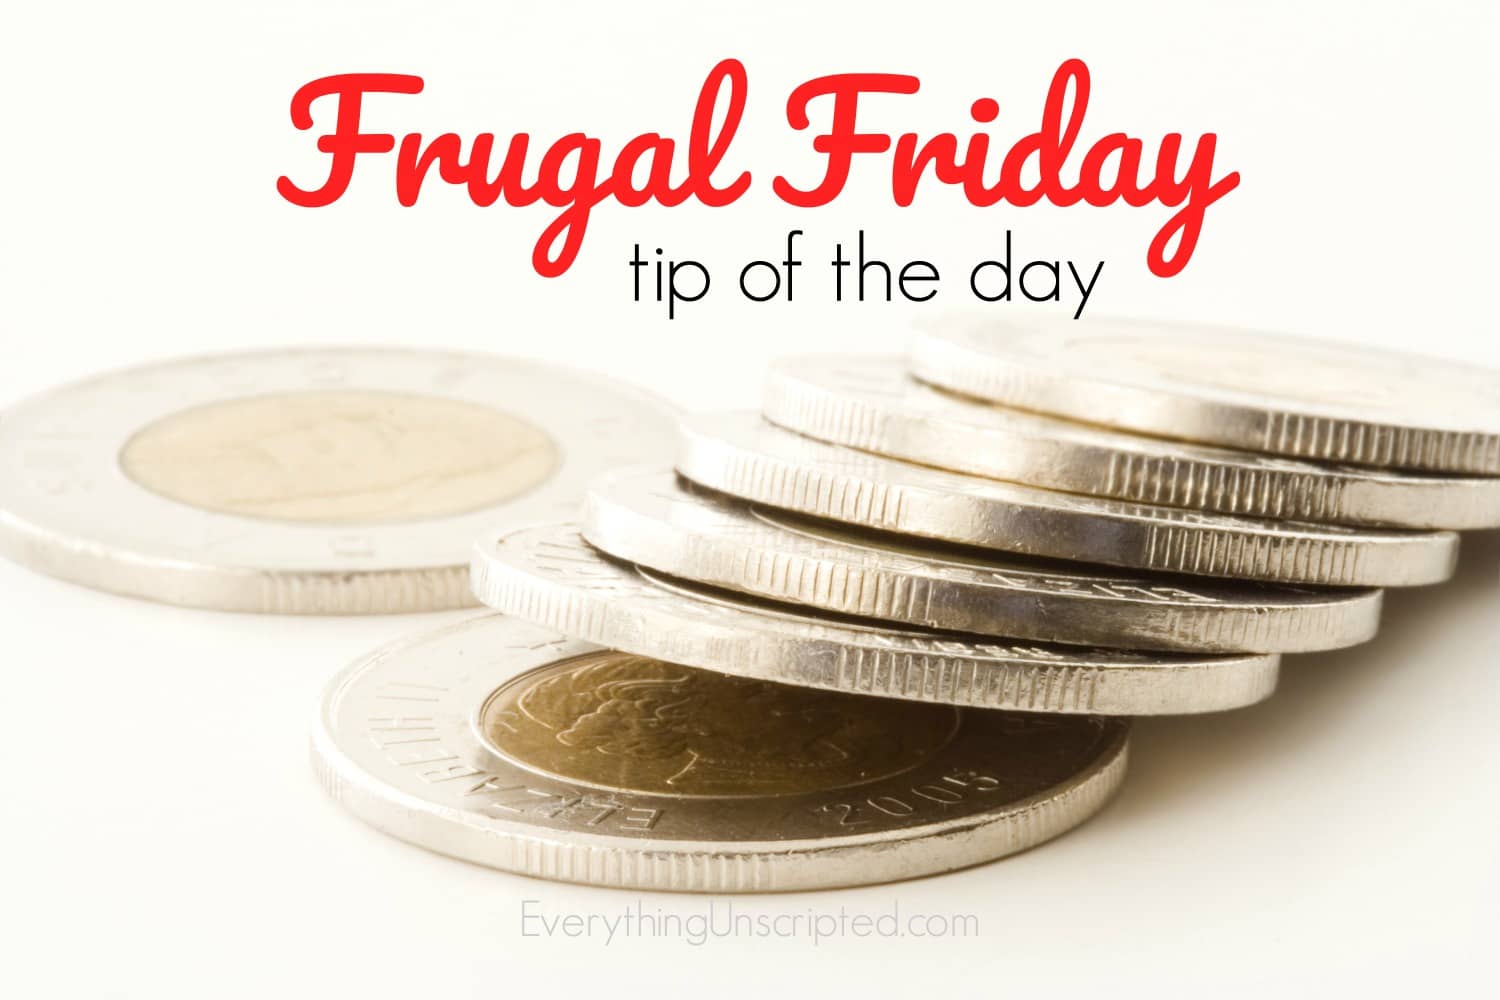 Frugal Friday Everything Unscripted